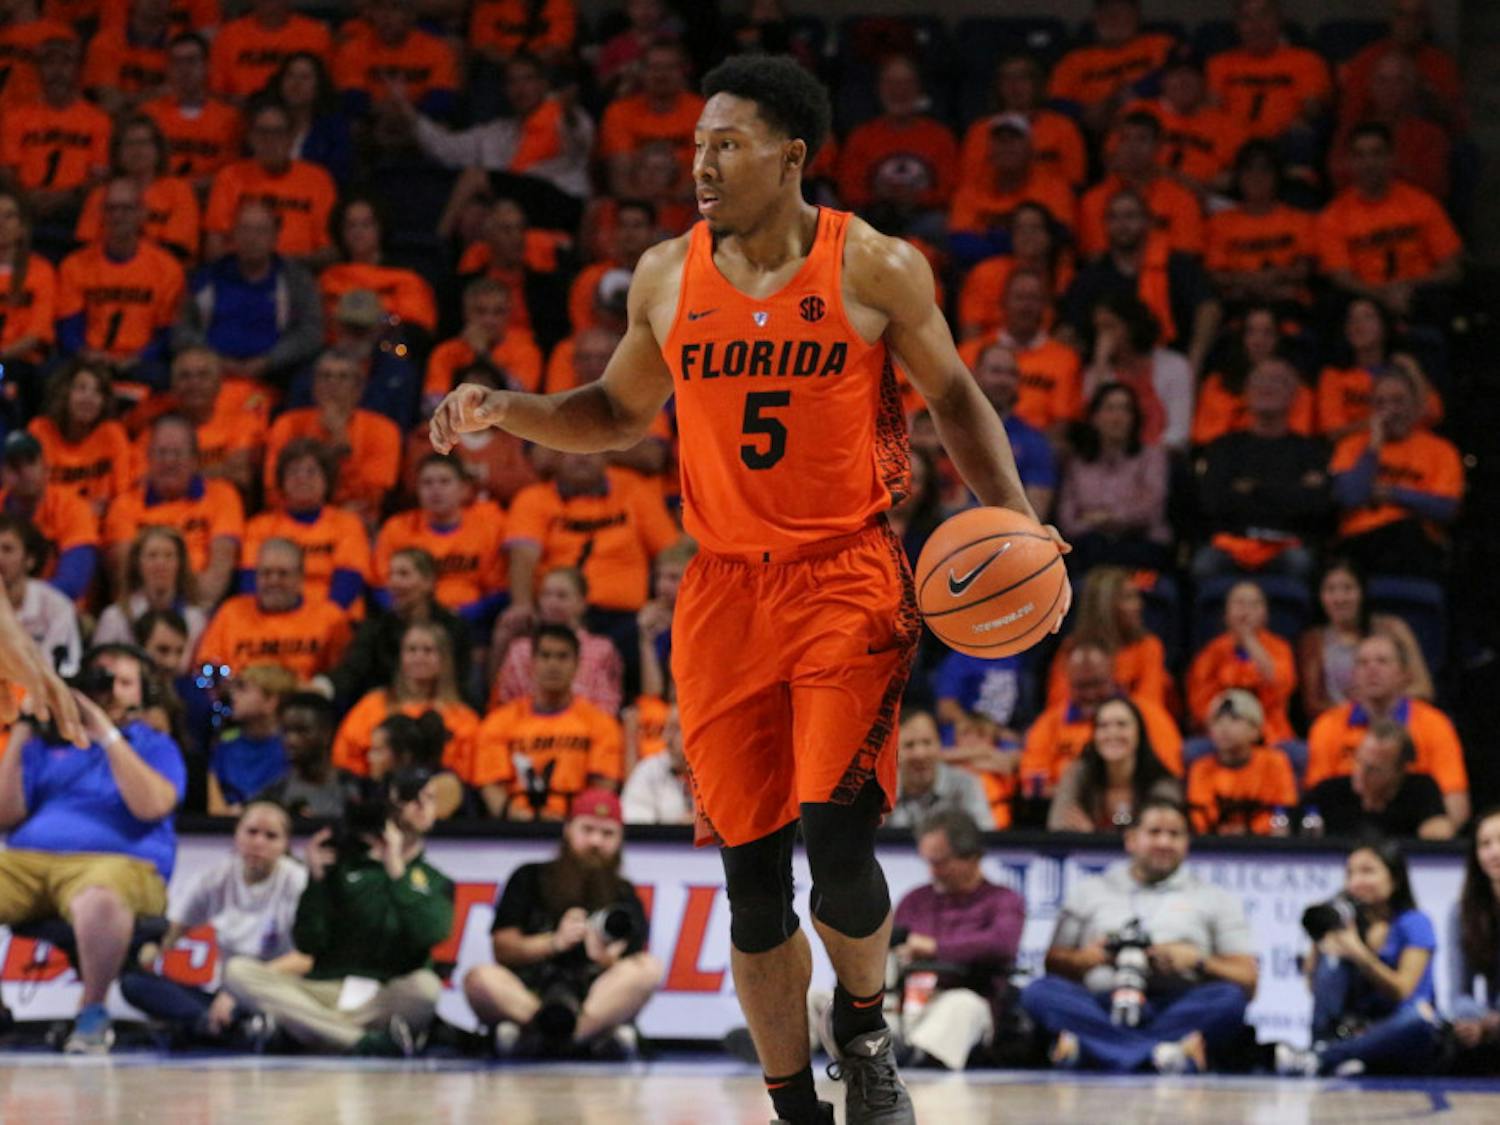 Senior guard KeVaughn Allen was held to zero points in Florida's 81-60 loss to Florida State.&nbsp;